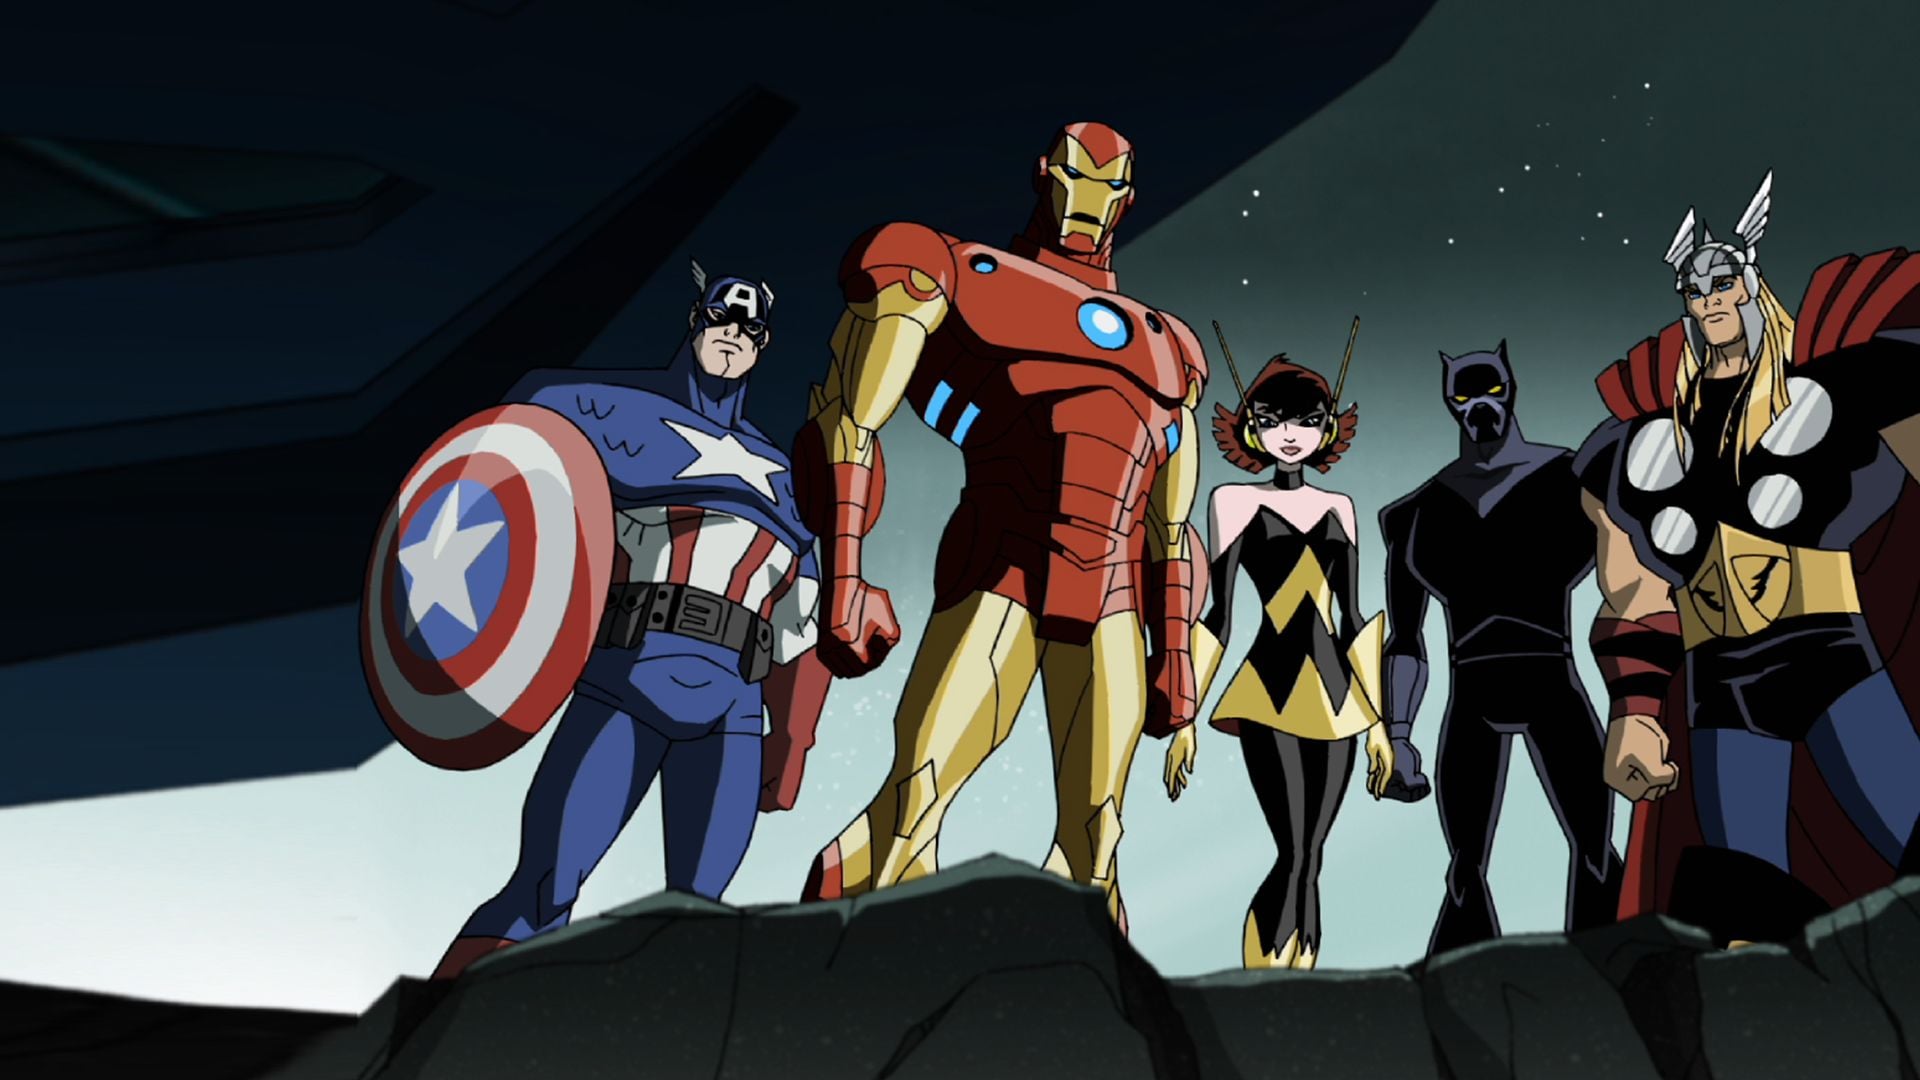 The Avengers: Earth's Mightiest Heroes. From Nostalgic Shows to